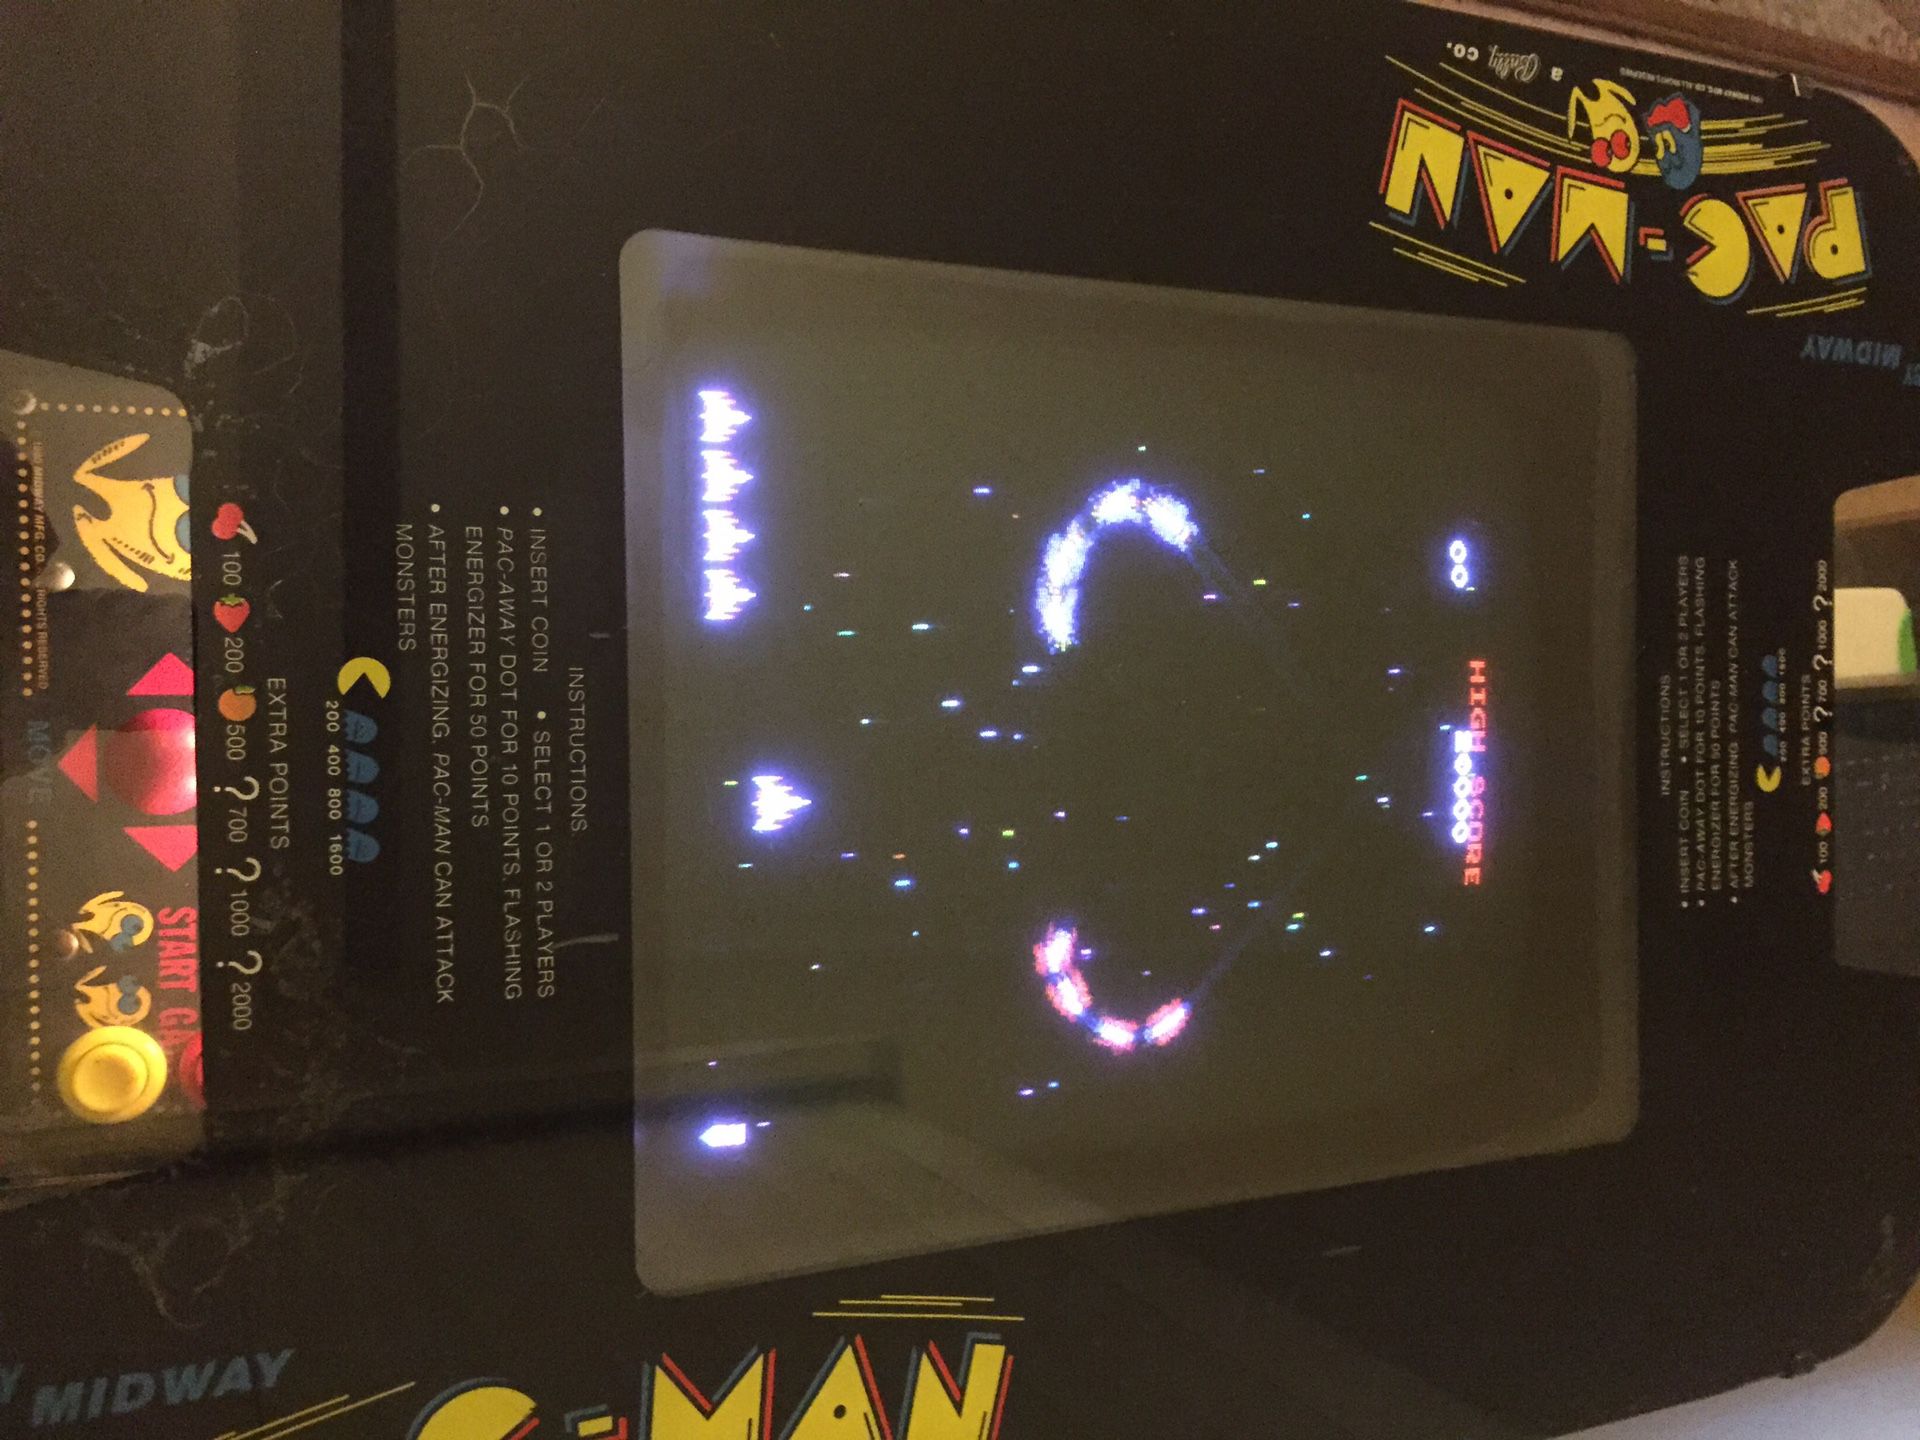 Original Midway Pac-Man Cocktail Arcade Game - Great Christmas Gift